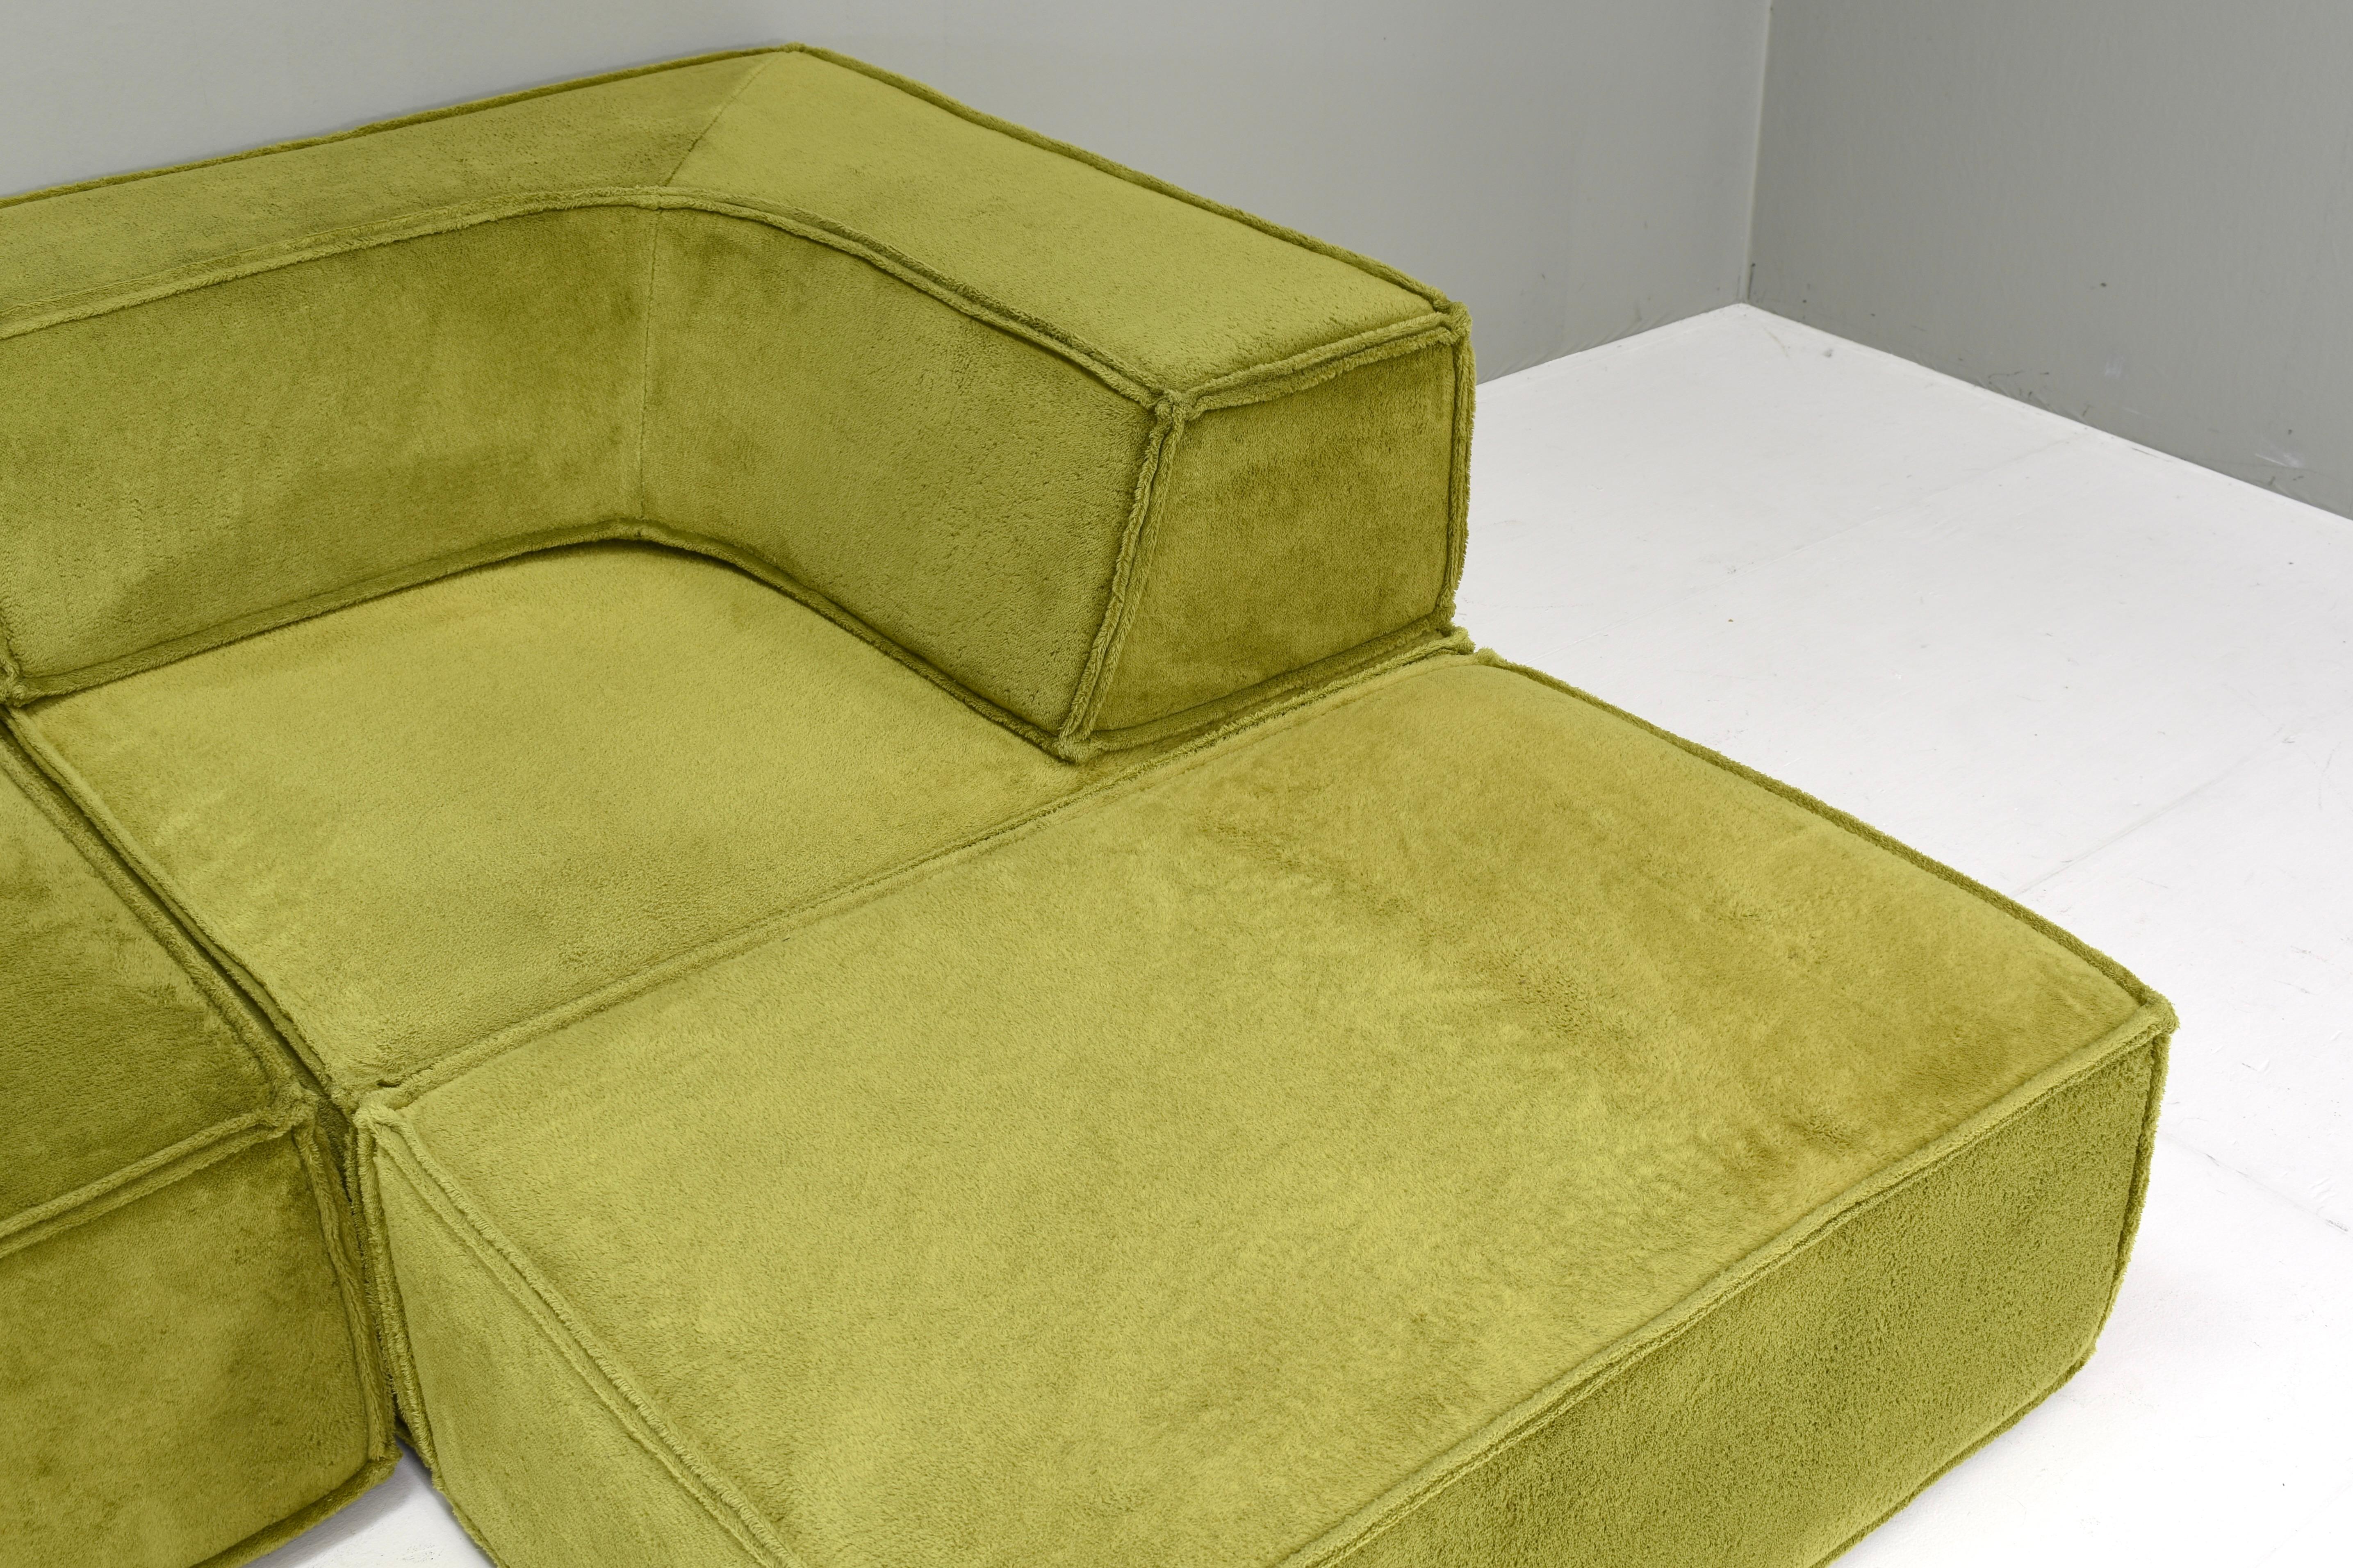 COR Trio Sectional Sofa by Team Form Ag for COR, Germany / Switzerland, 1972 10